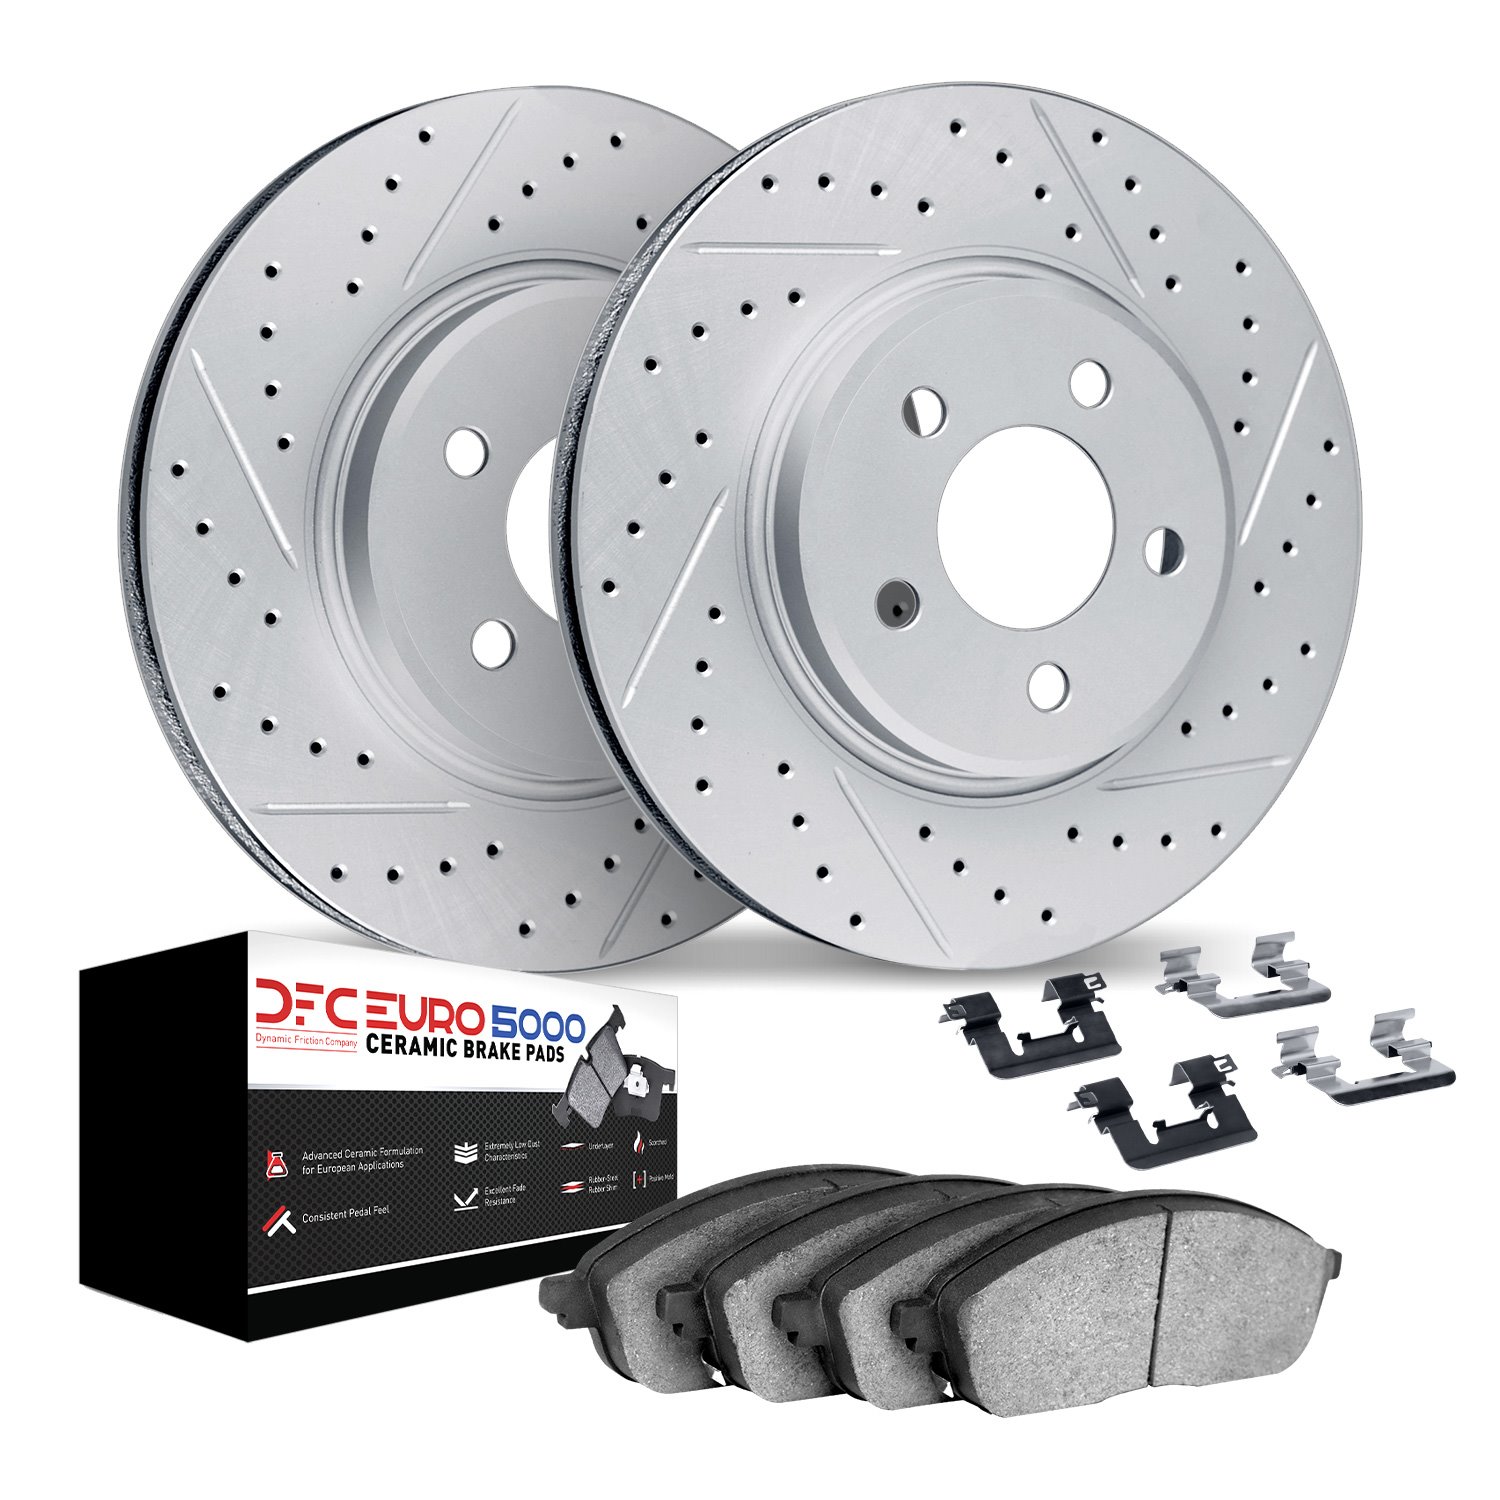 2612-02012 Geoperformance Drilled/Slotted Rotors w/5000 Euro Ceramic Brake Pads Kit & Hardware, 1978-1983 Porsche, Position: Fro